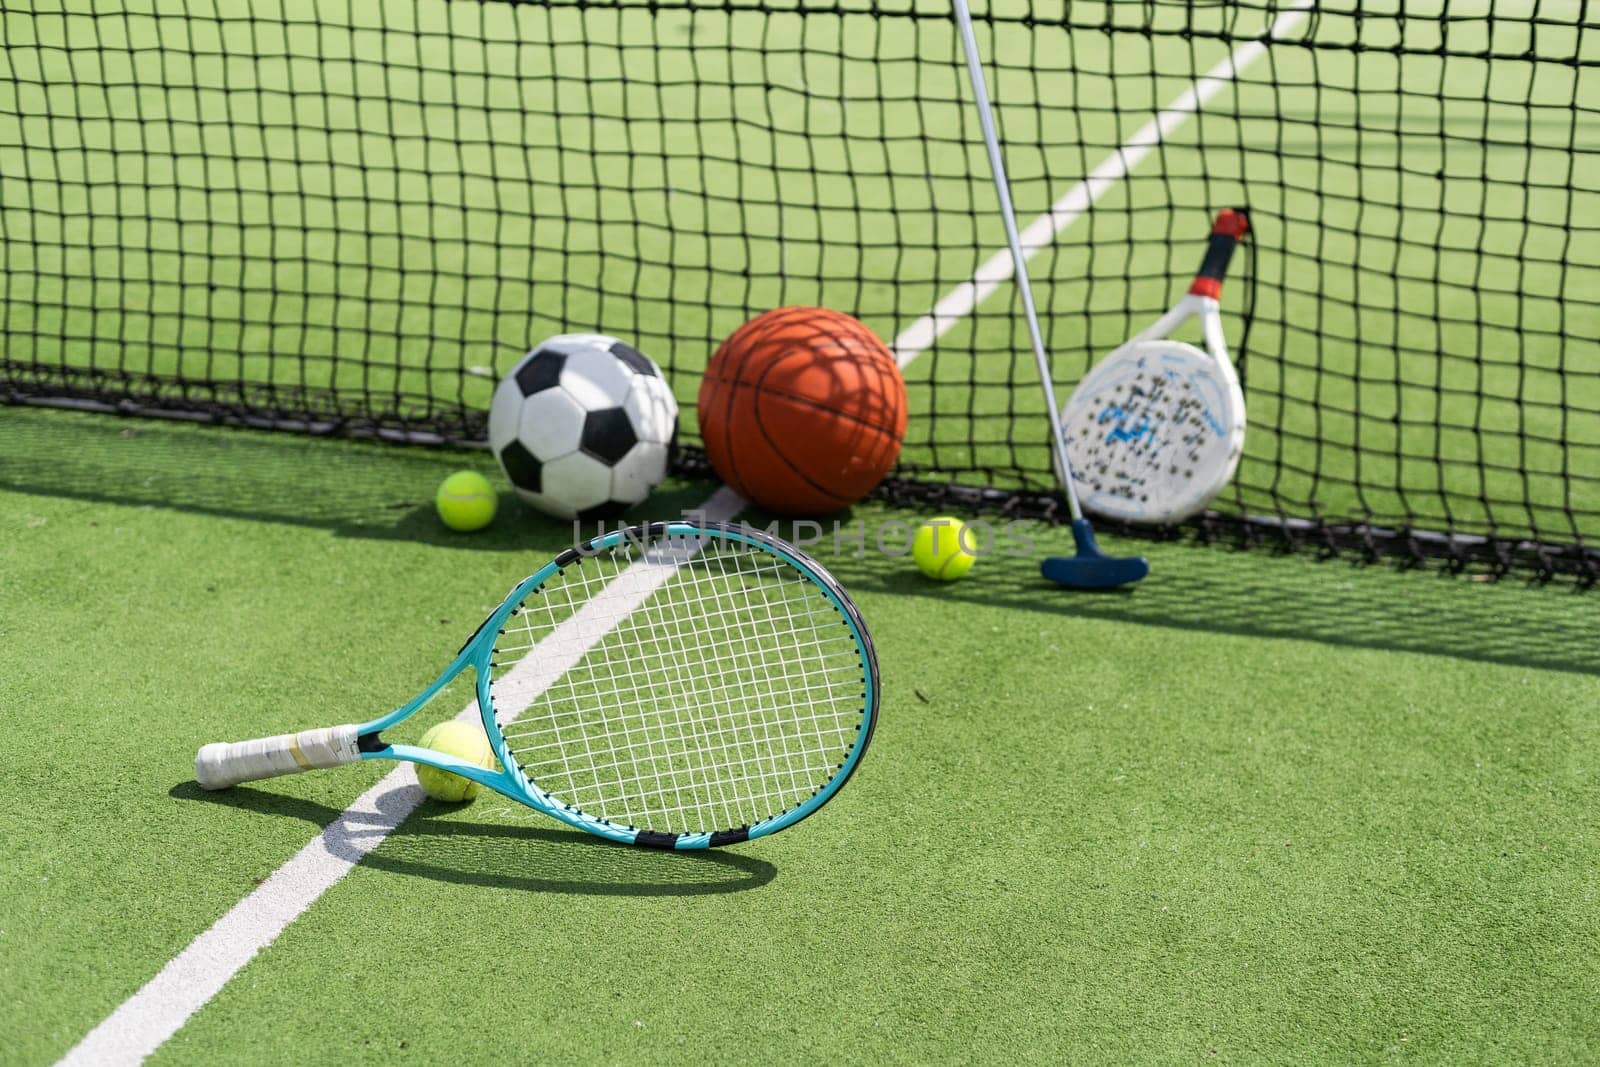 A variety of sports equipment including an american football, a soccer ball, a tennis racket, a tennis ball, and a basketball by Andelov13